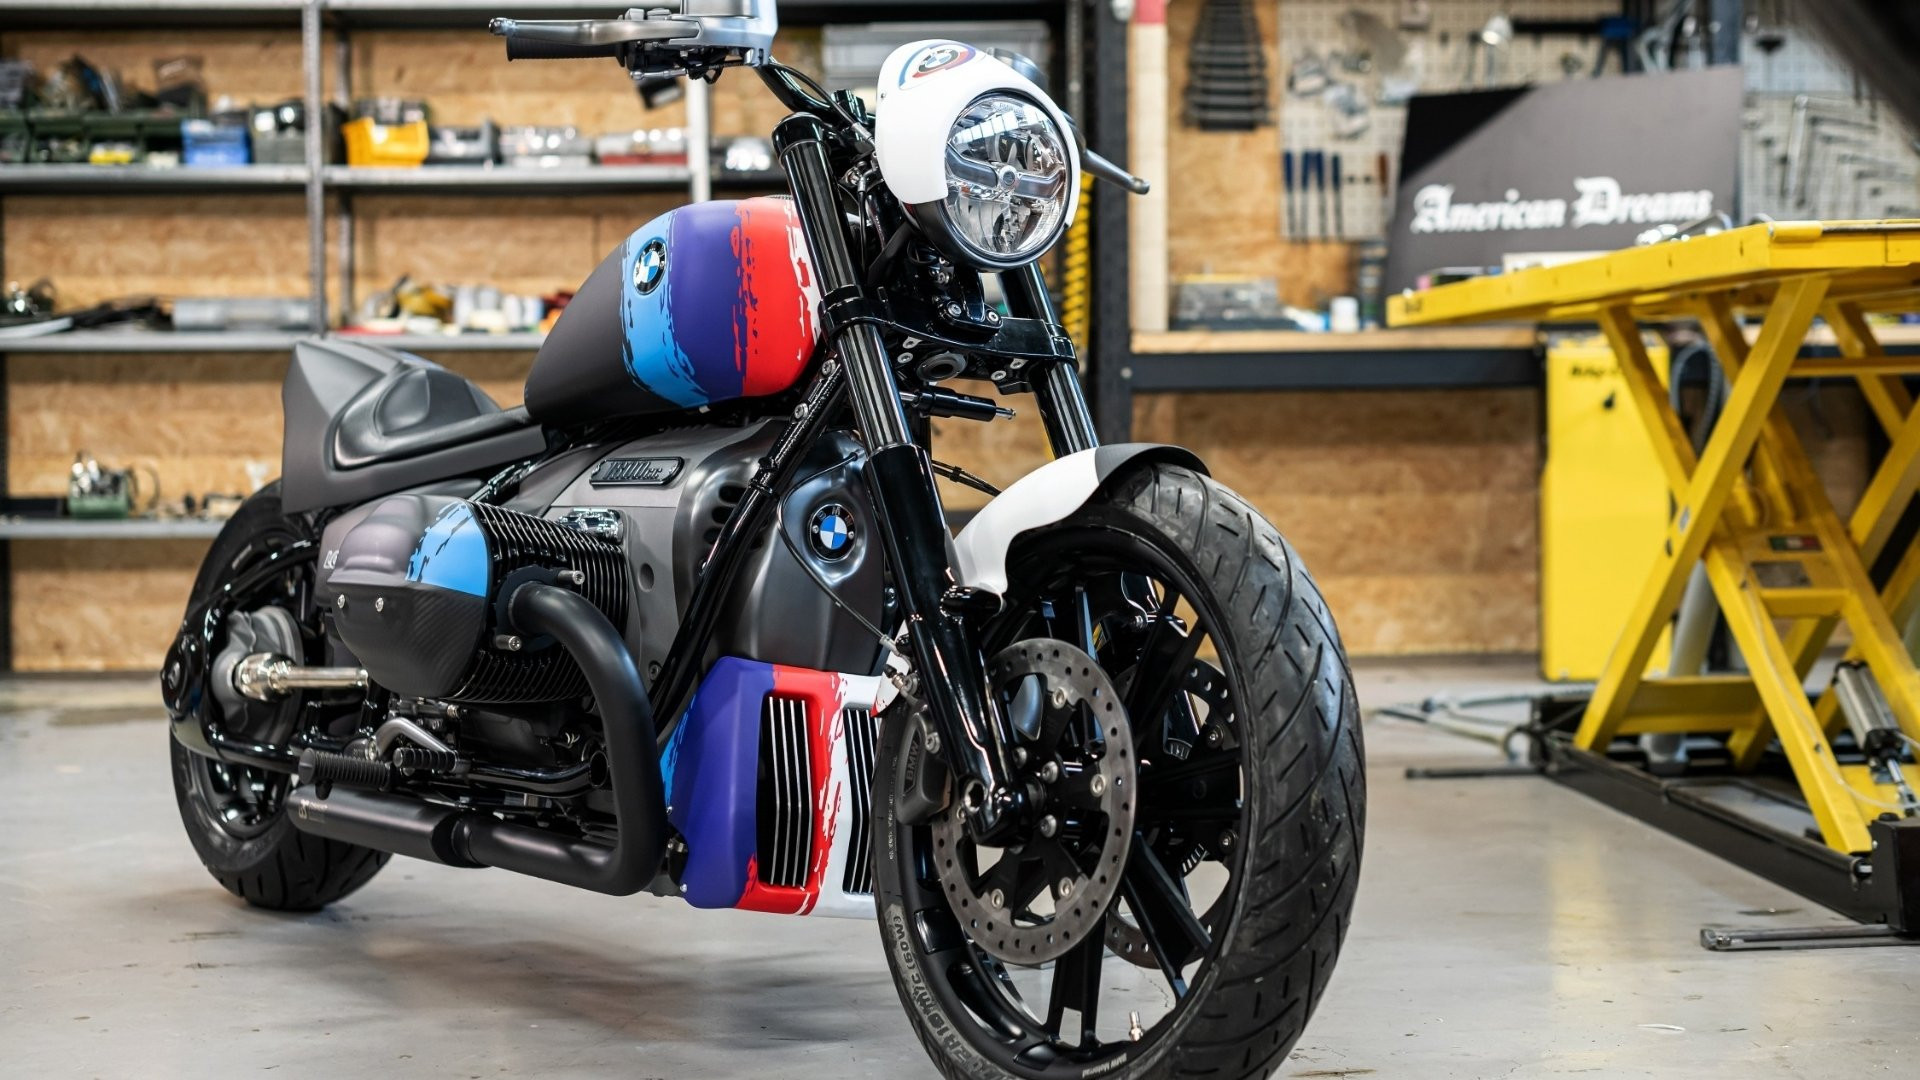 Explore the BMW R 18 One Eight “C” at BMW Motorcycles of Temecula: A Masterpiece of Motorrad Engineering